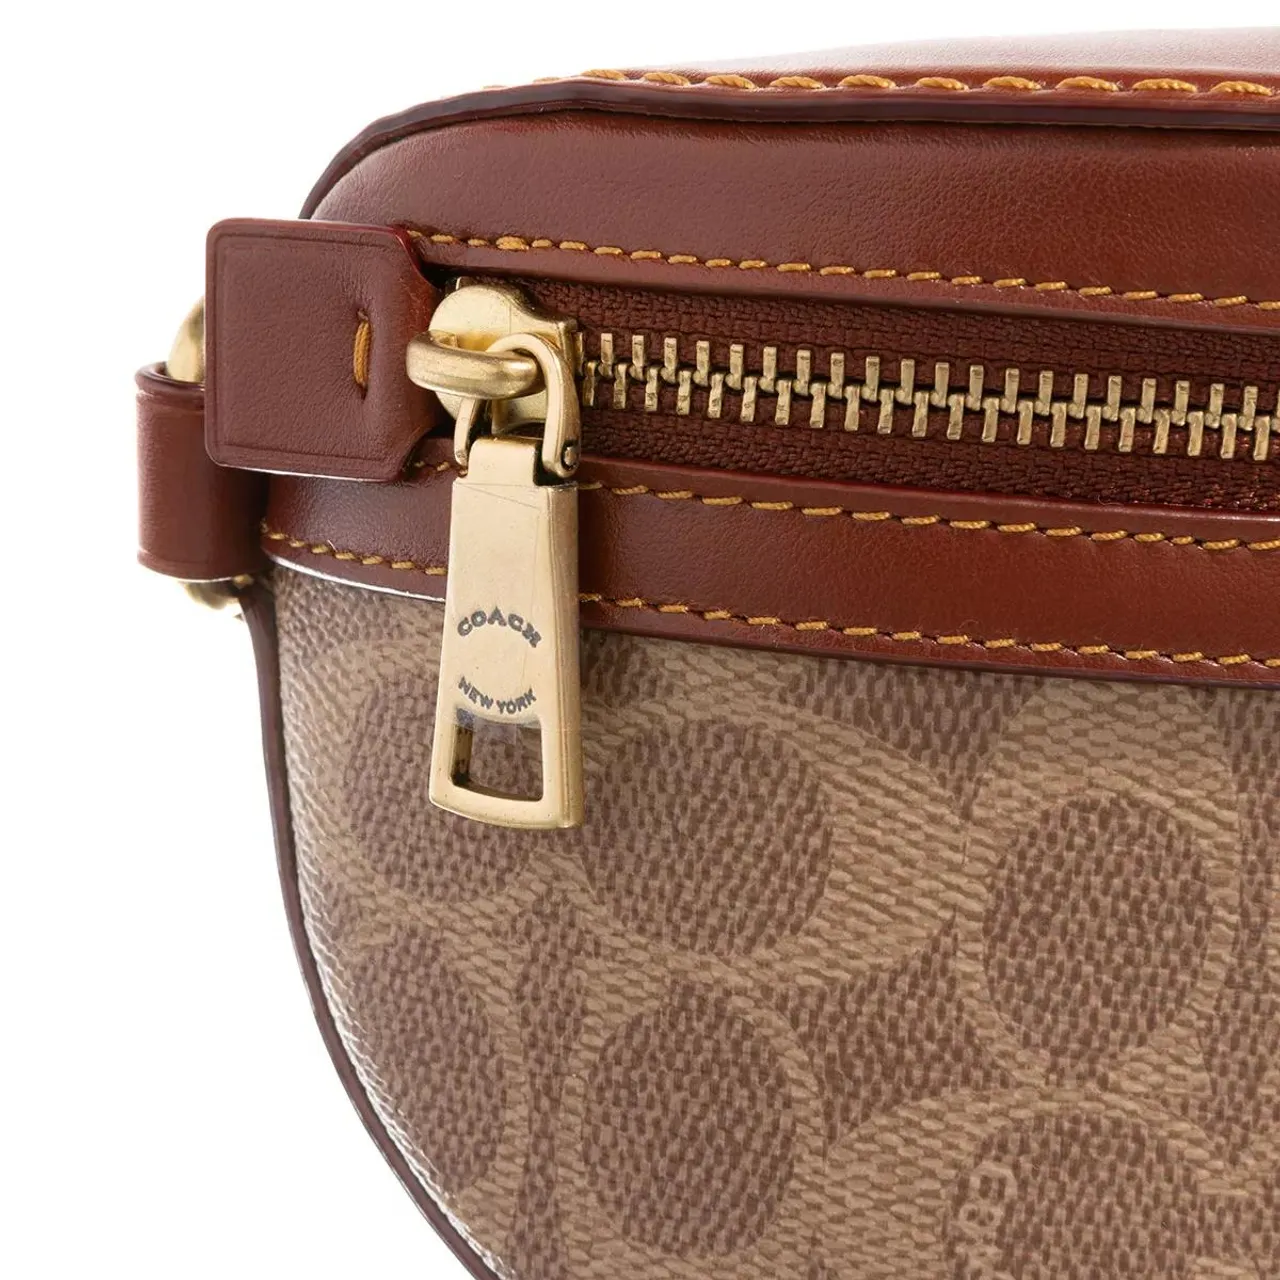 Coach Bum Bags - Coated Canvas Signature Bethany Belt Bag - brown - Bum Bags for ladies